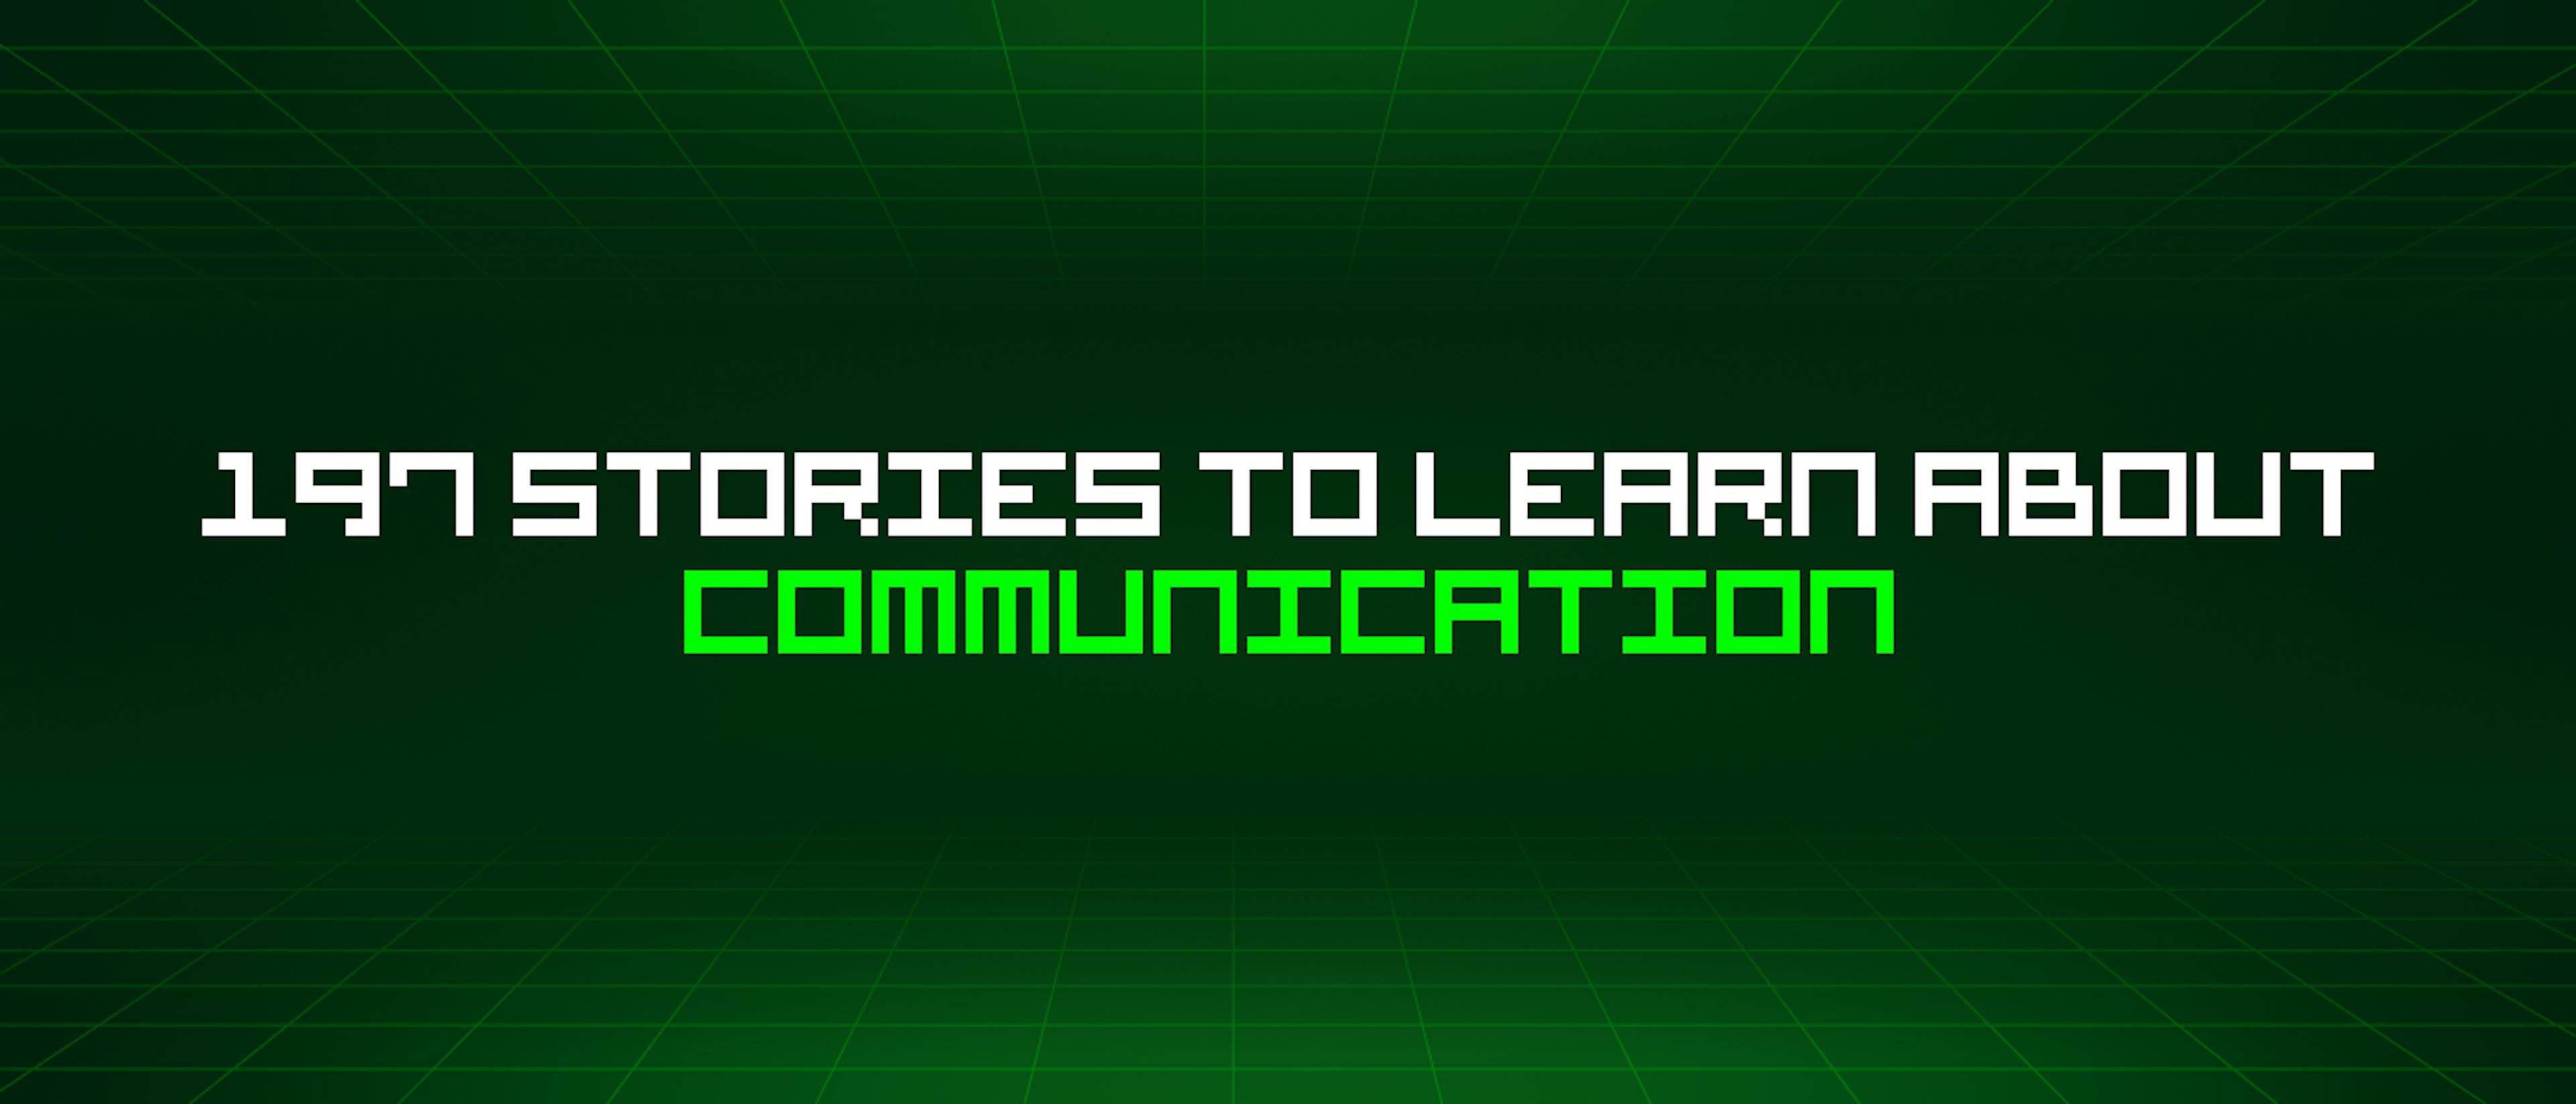 featured image - 197 Stories To Learn About Communication